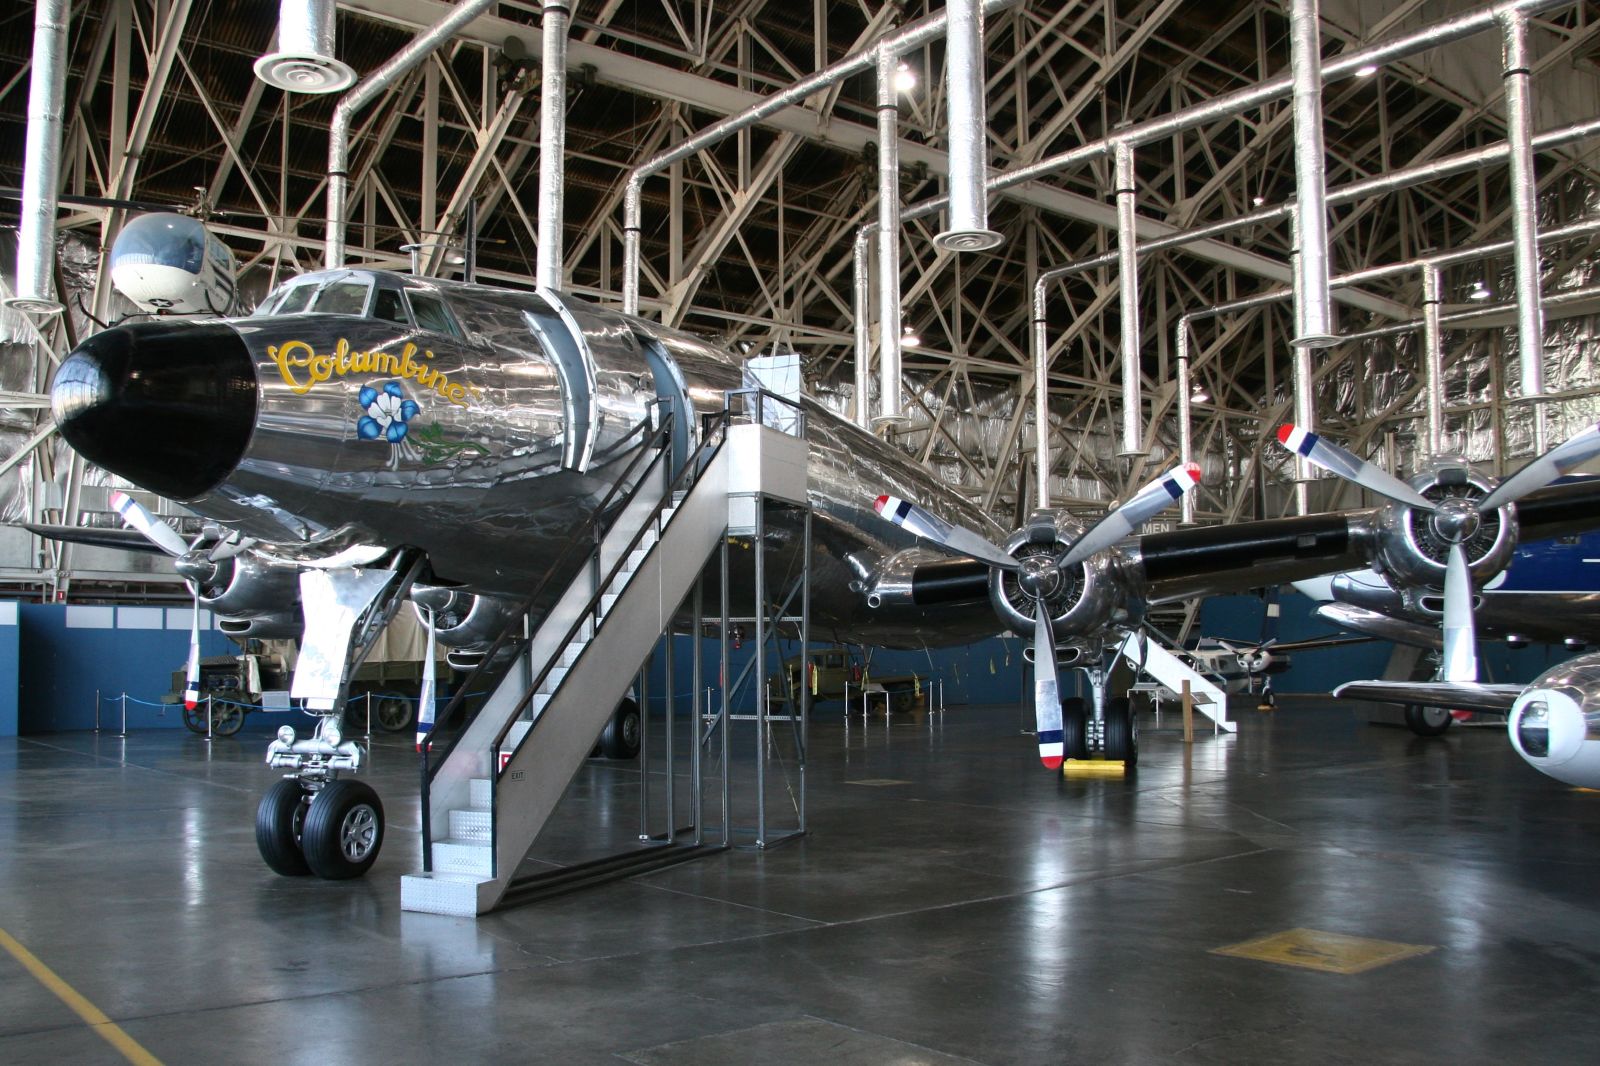 a large airplane sits in an indoor hangar